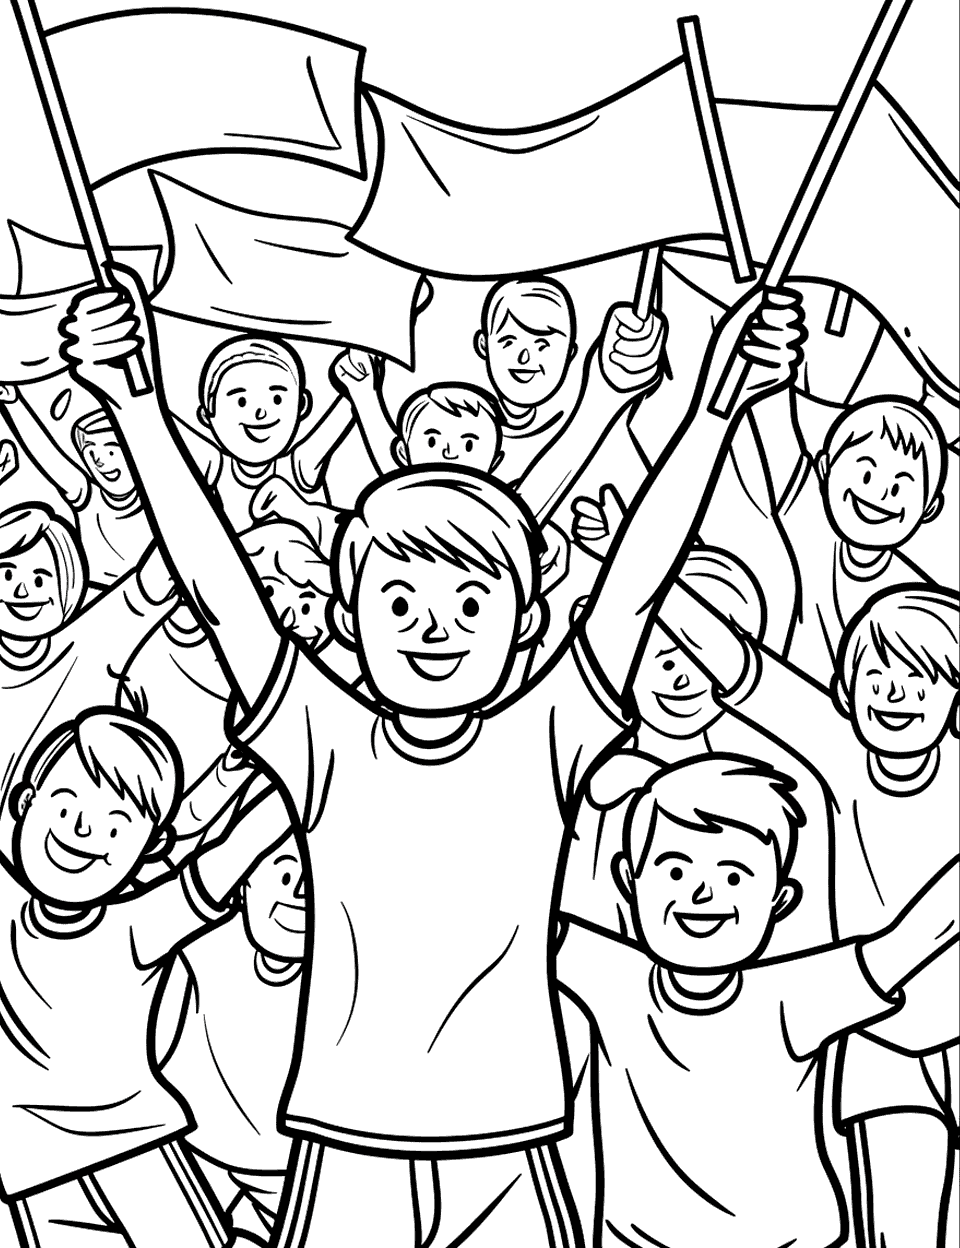 Soccer Celebration Coloring Page - Fans in the stands celebrating a win with banners and flags after a match.